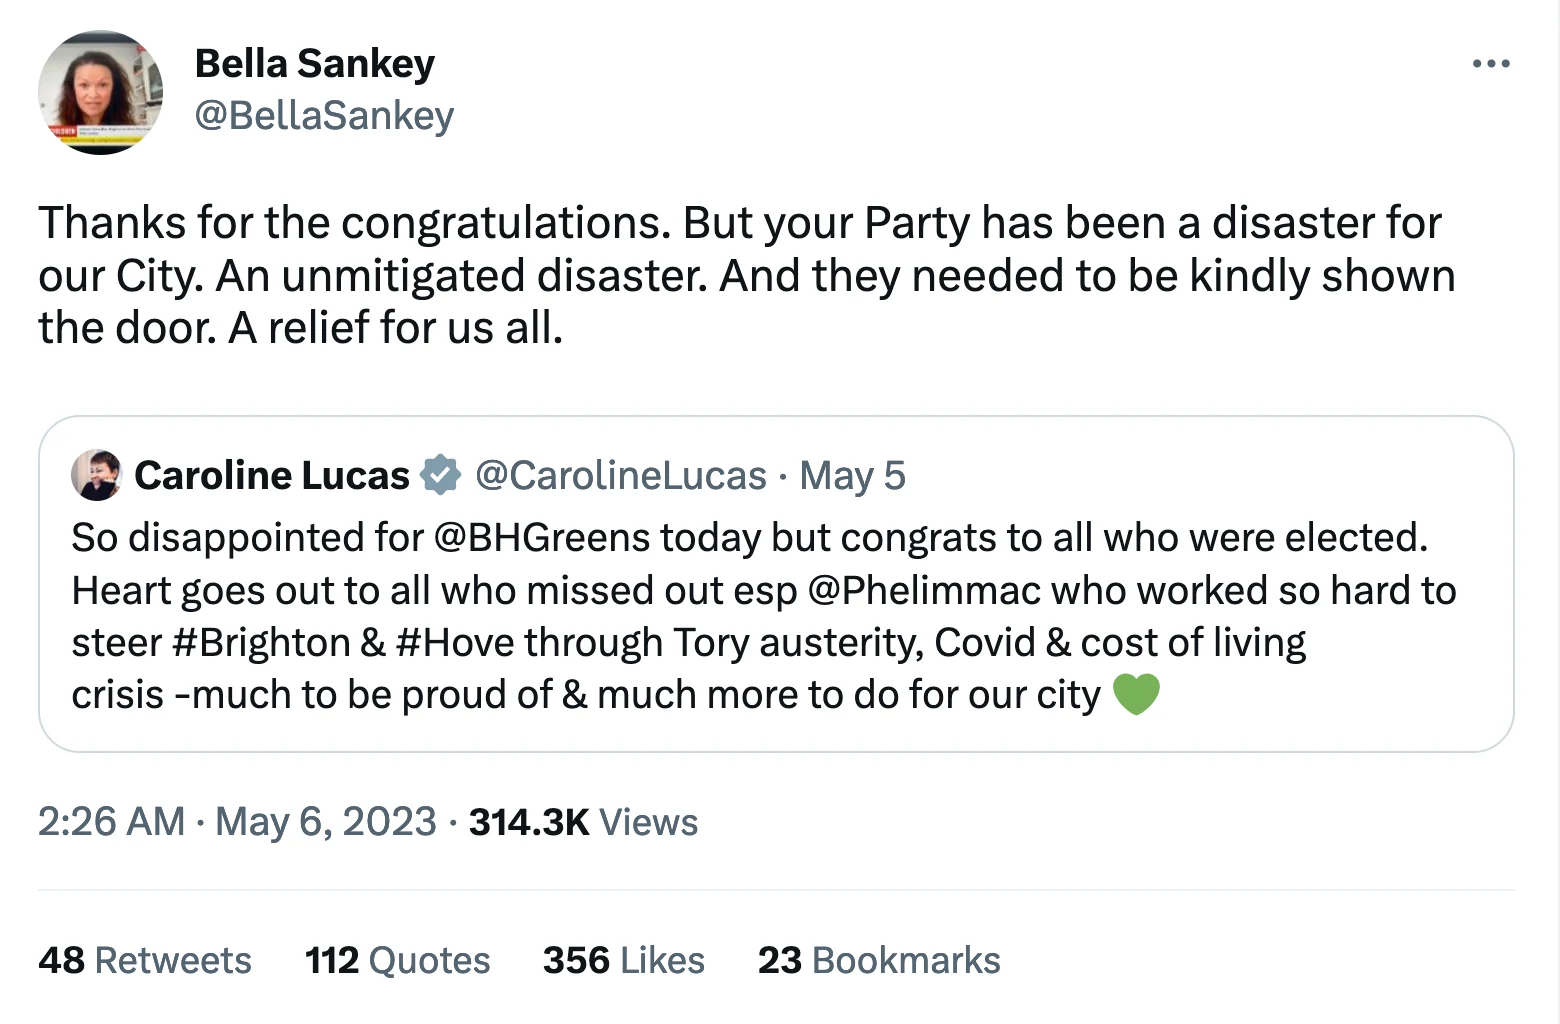 Thanks for the congratulations. But your Party has been a disaster for our City. An unmitigated disaster. And they needed to be kindly shown the door. A relief for us all.
